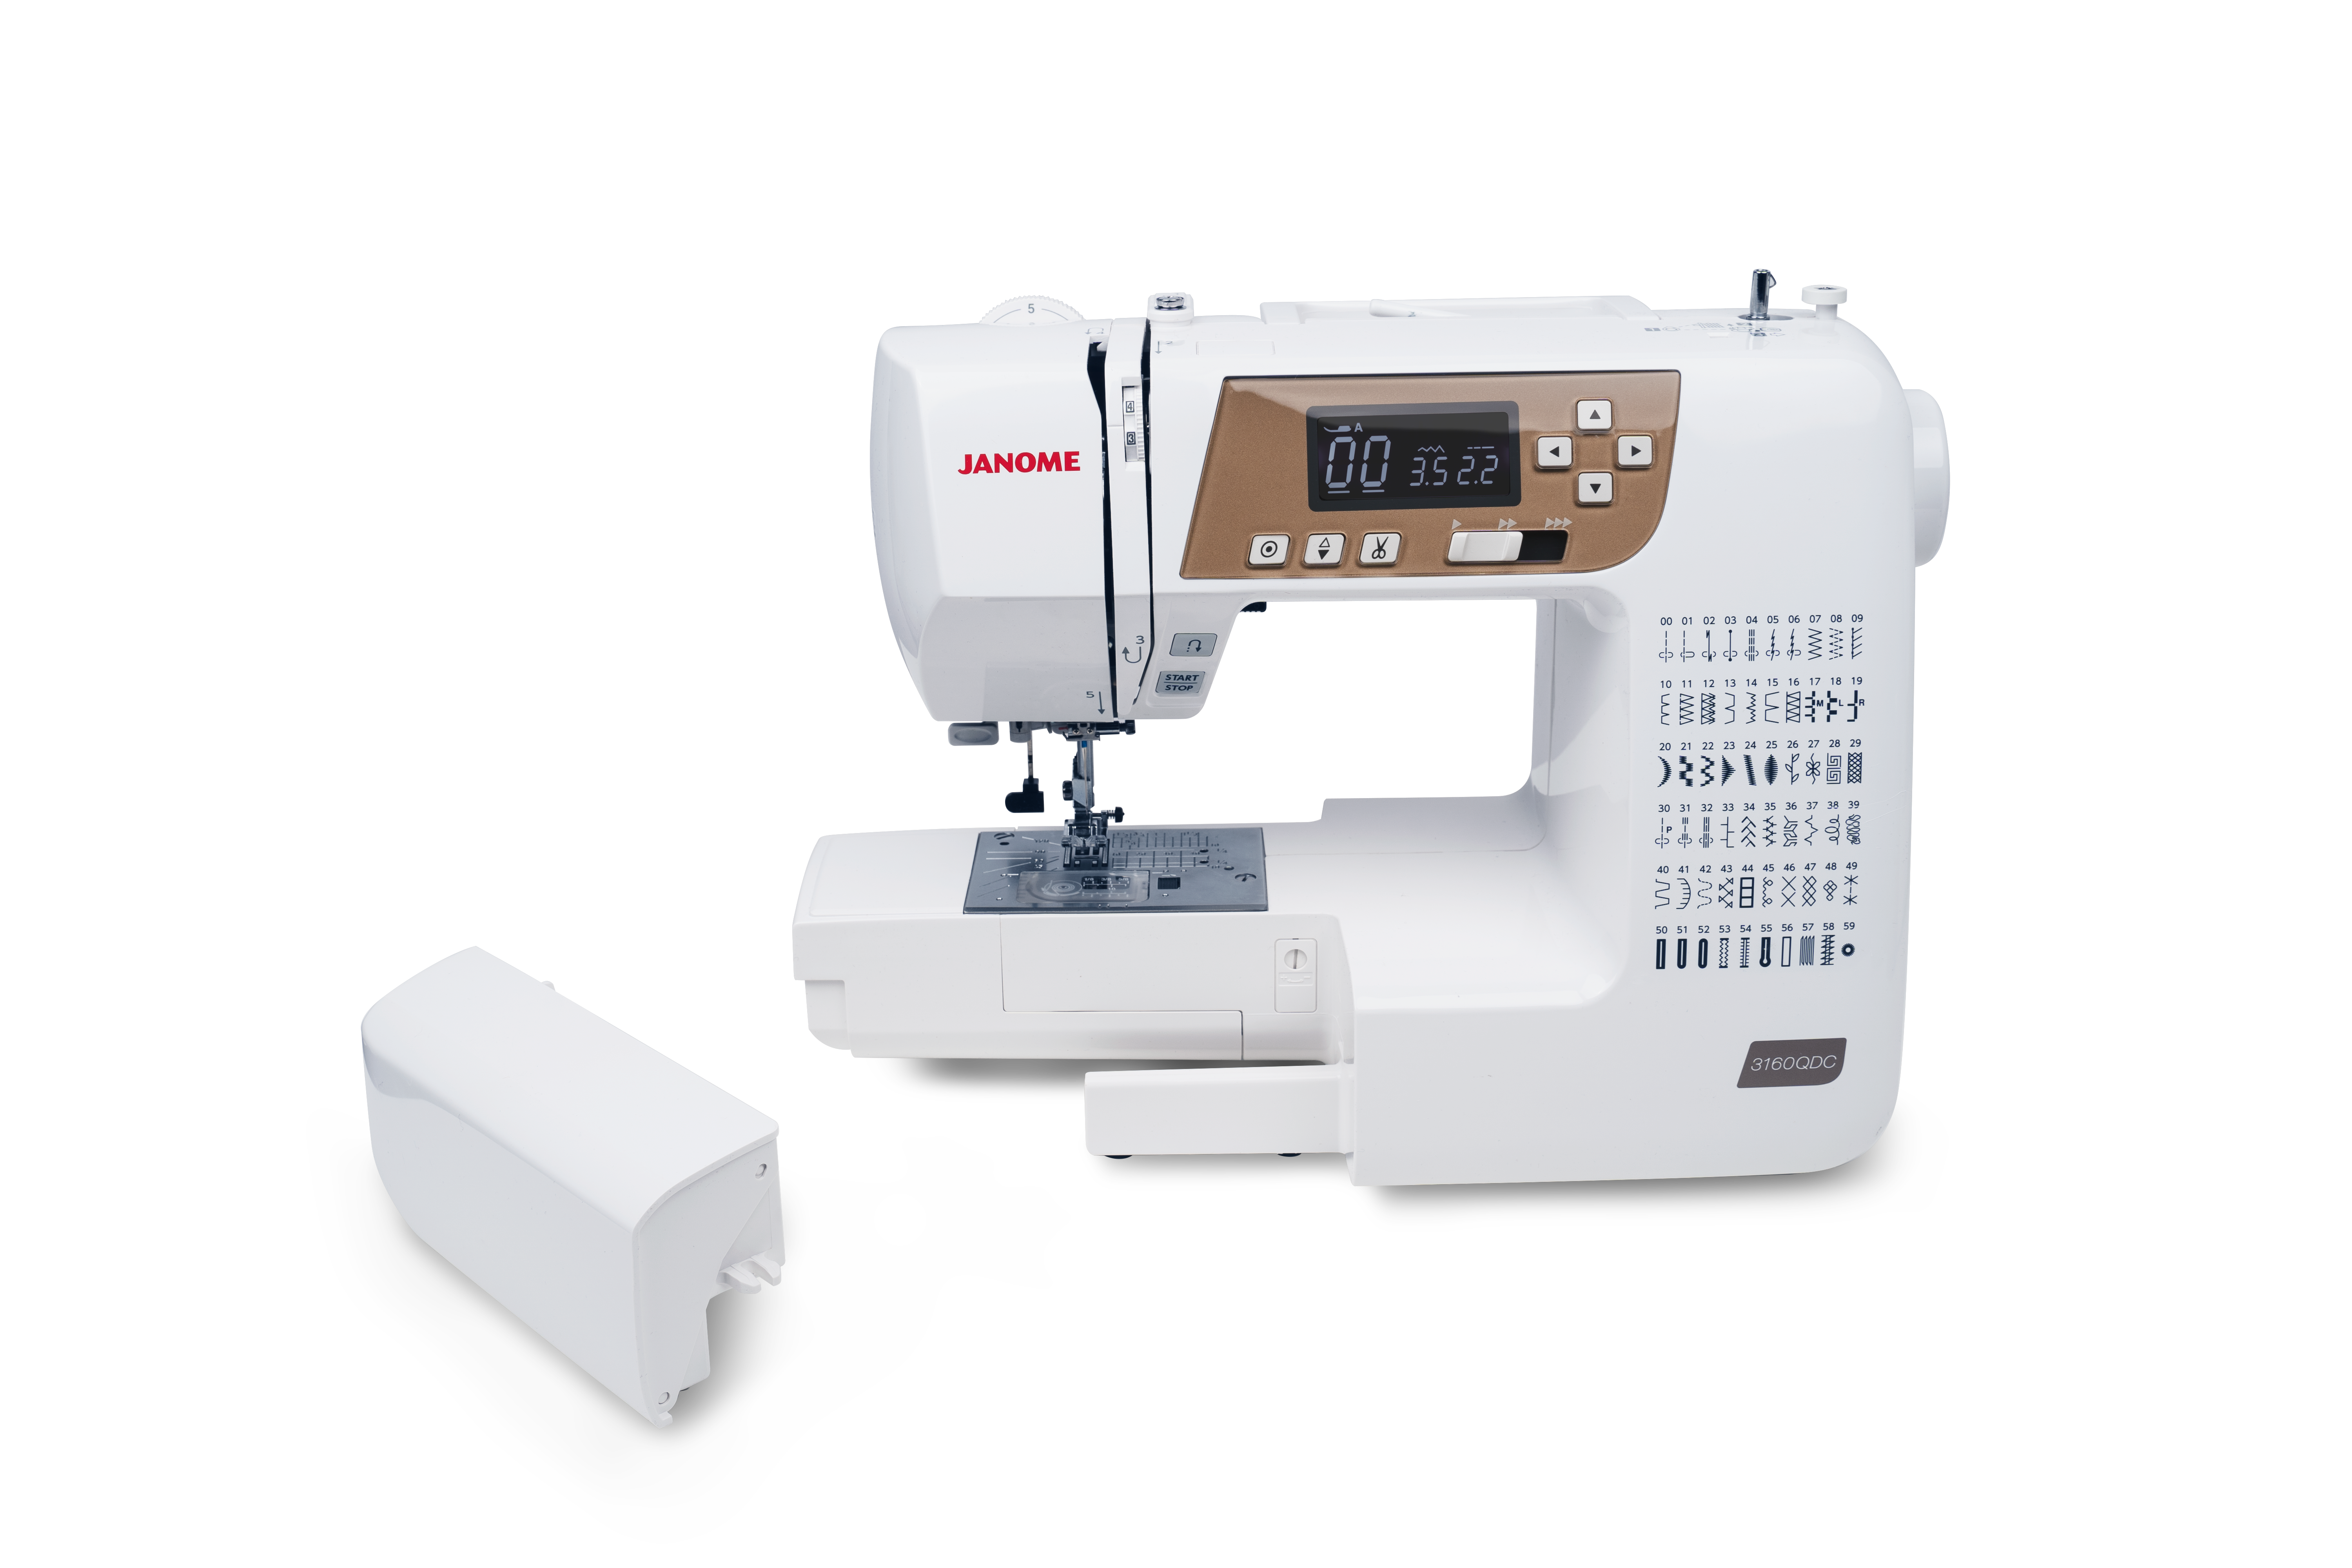 Janome Convertible Even Feed Foot Set Memory Craft Embroidery Machines & High Shank Models